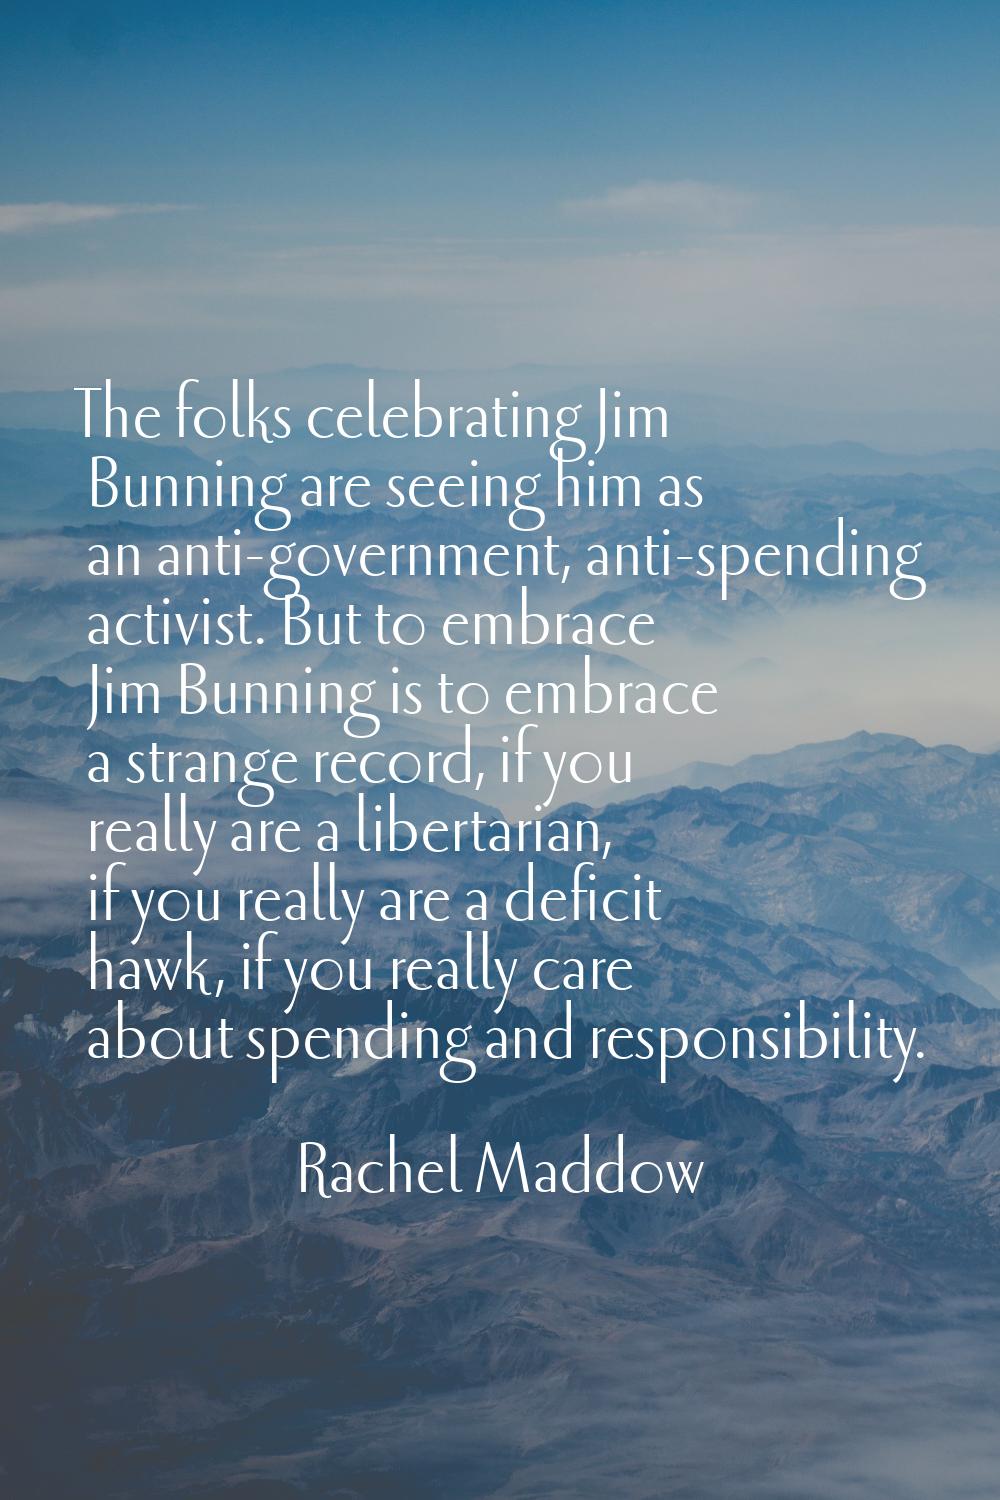 The folks celebrating Jim Bunning are seeing him as an anti-government, anti-spending activist. But